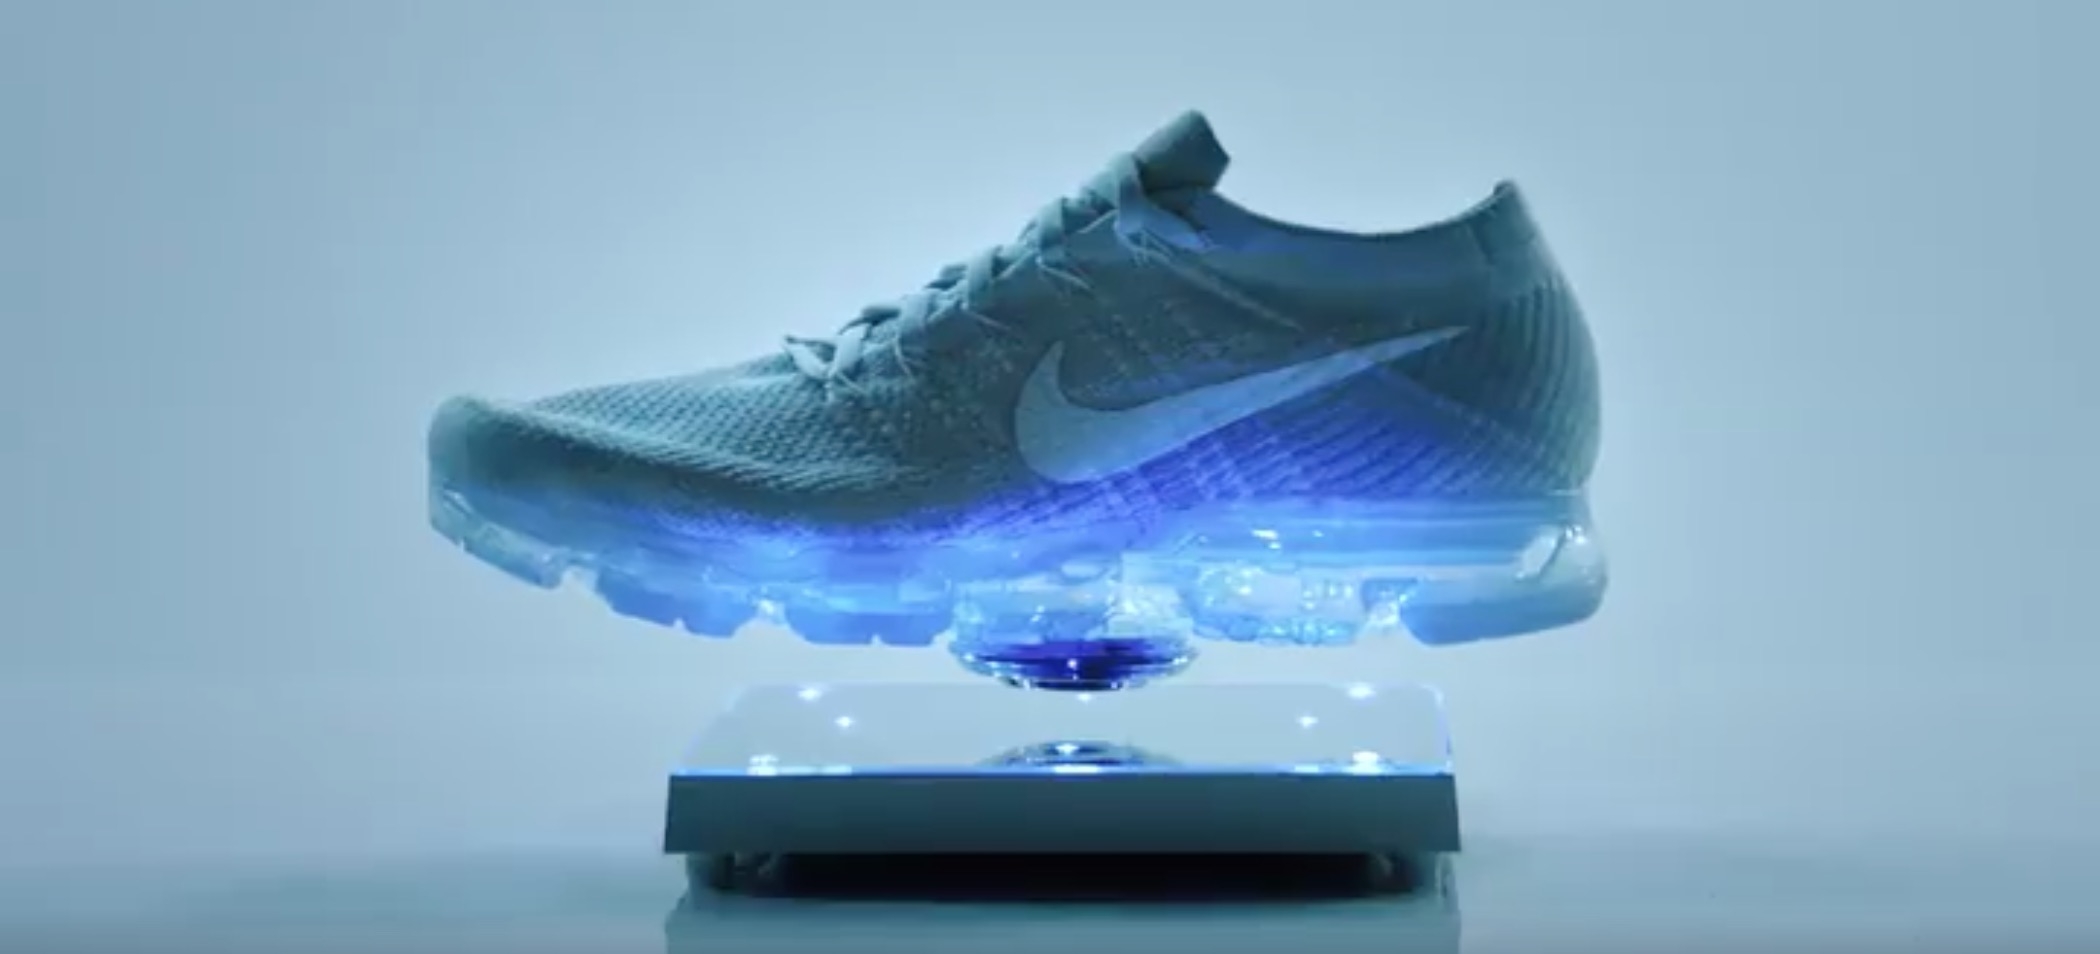 vapormax nike commercial